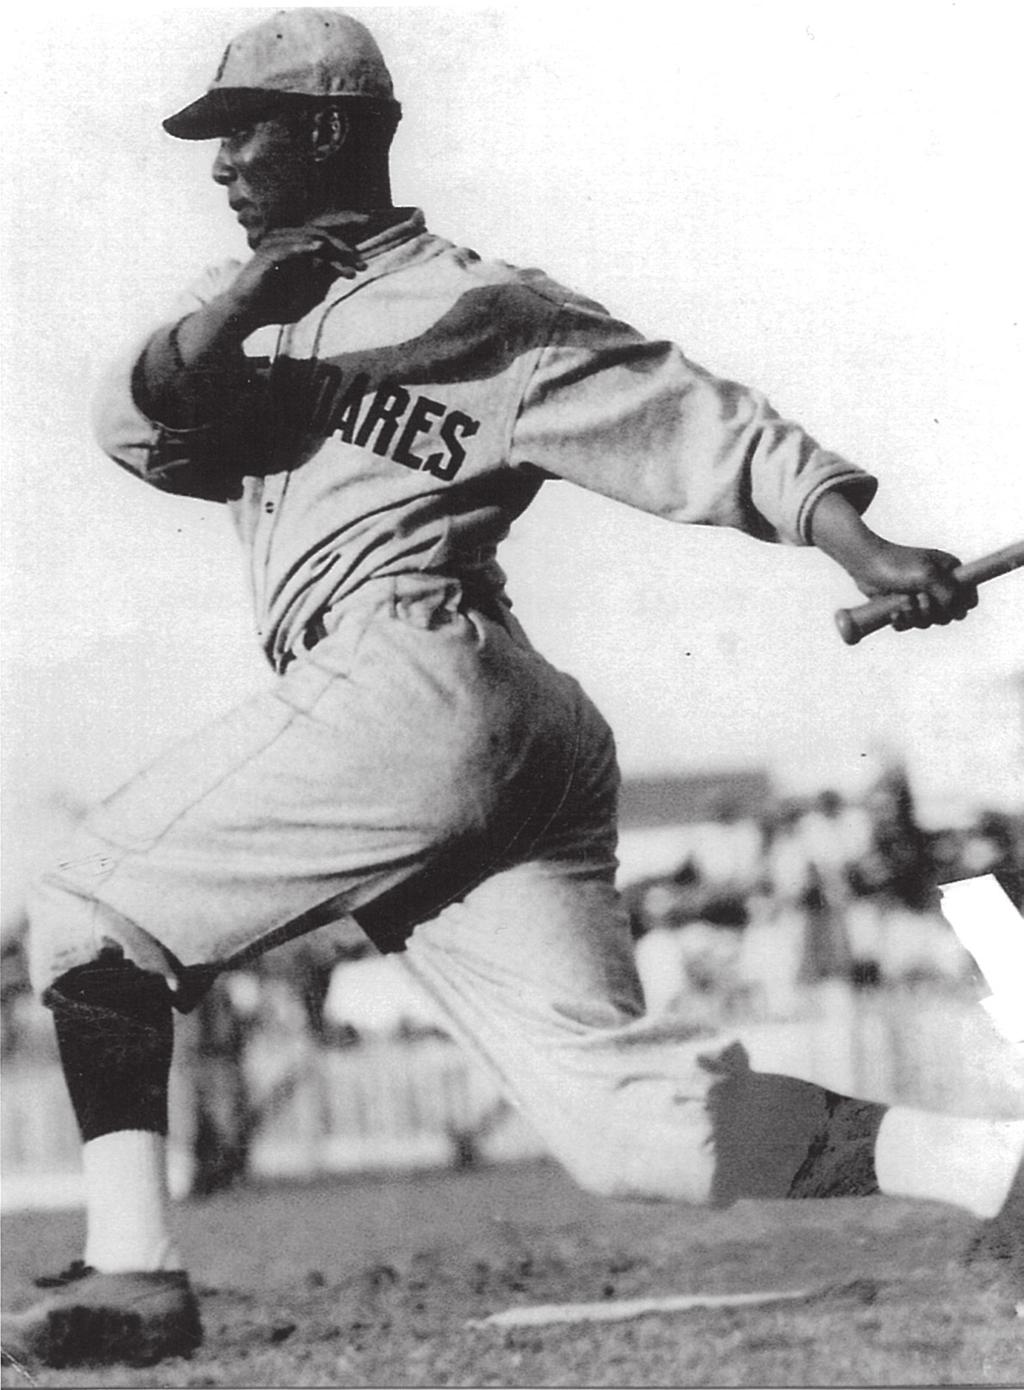 Florida Hotel League After the regular 1925 baseball season had concluded in the East, Scales joined Homestead Grays pitcher Smoky Joe Williams and went to Florida to play for the Royal Poinciana